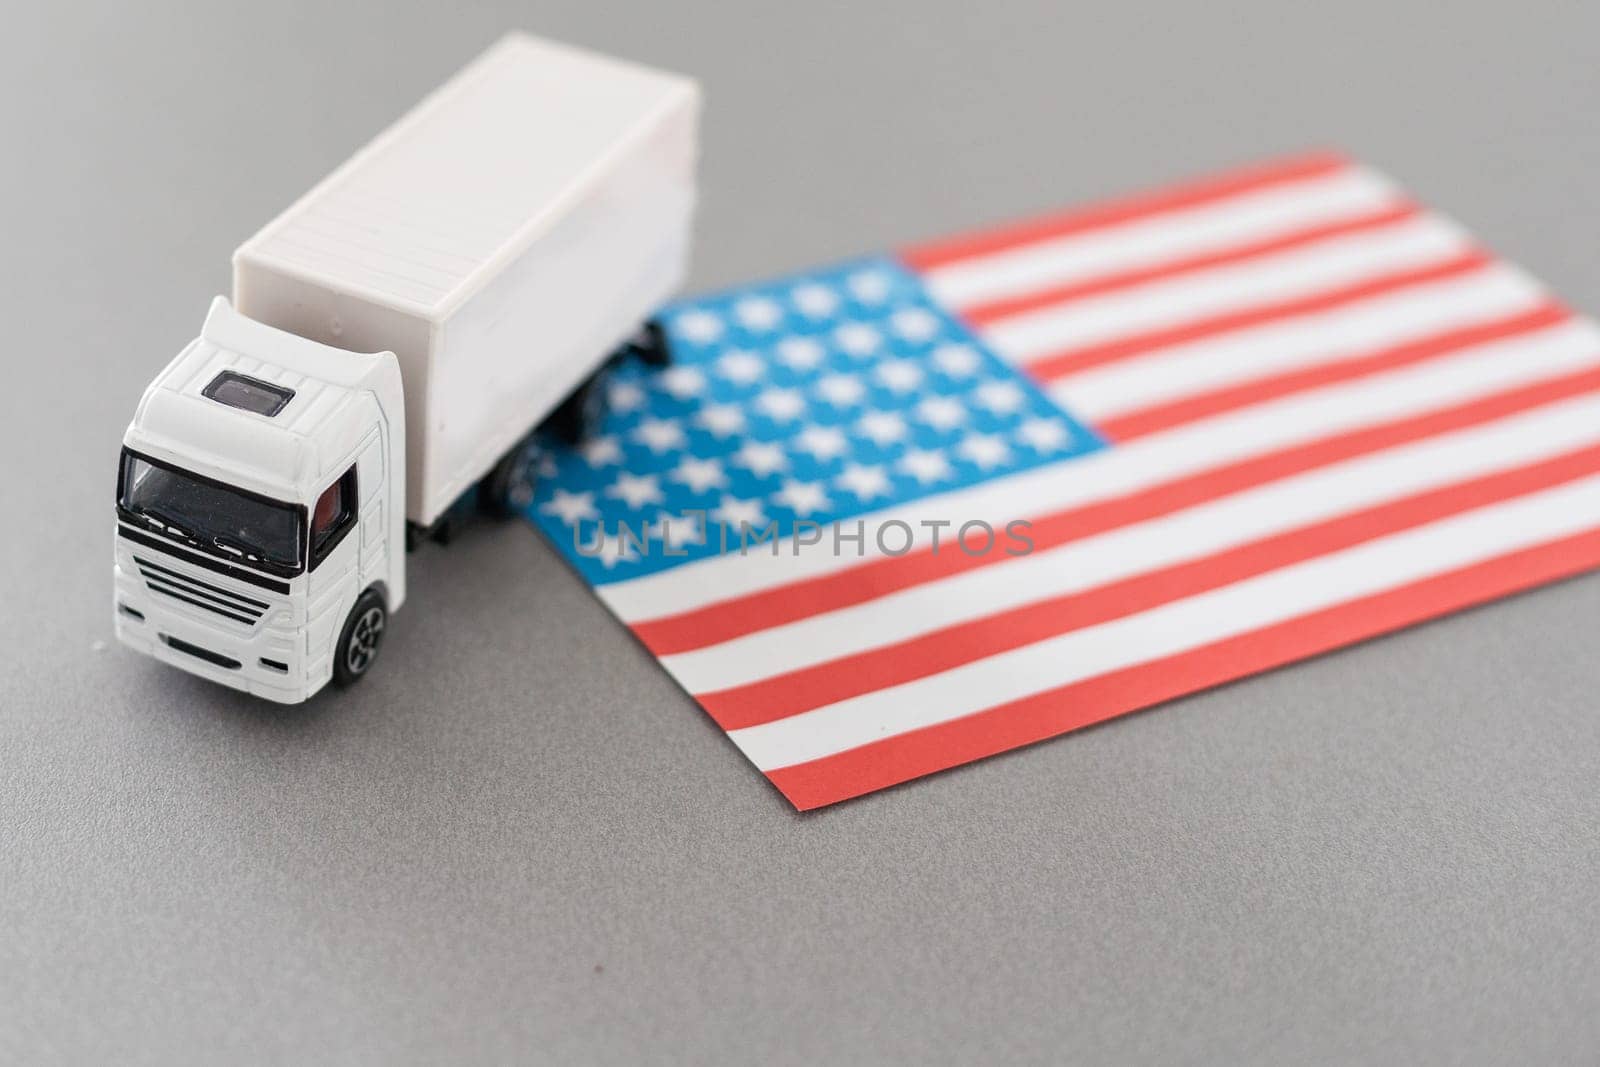 USA Logistics Concept. White Delivery Van on USA Flag background. 3d Rendering. High quality photo